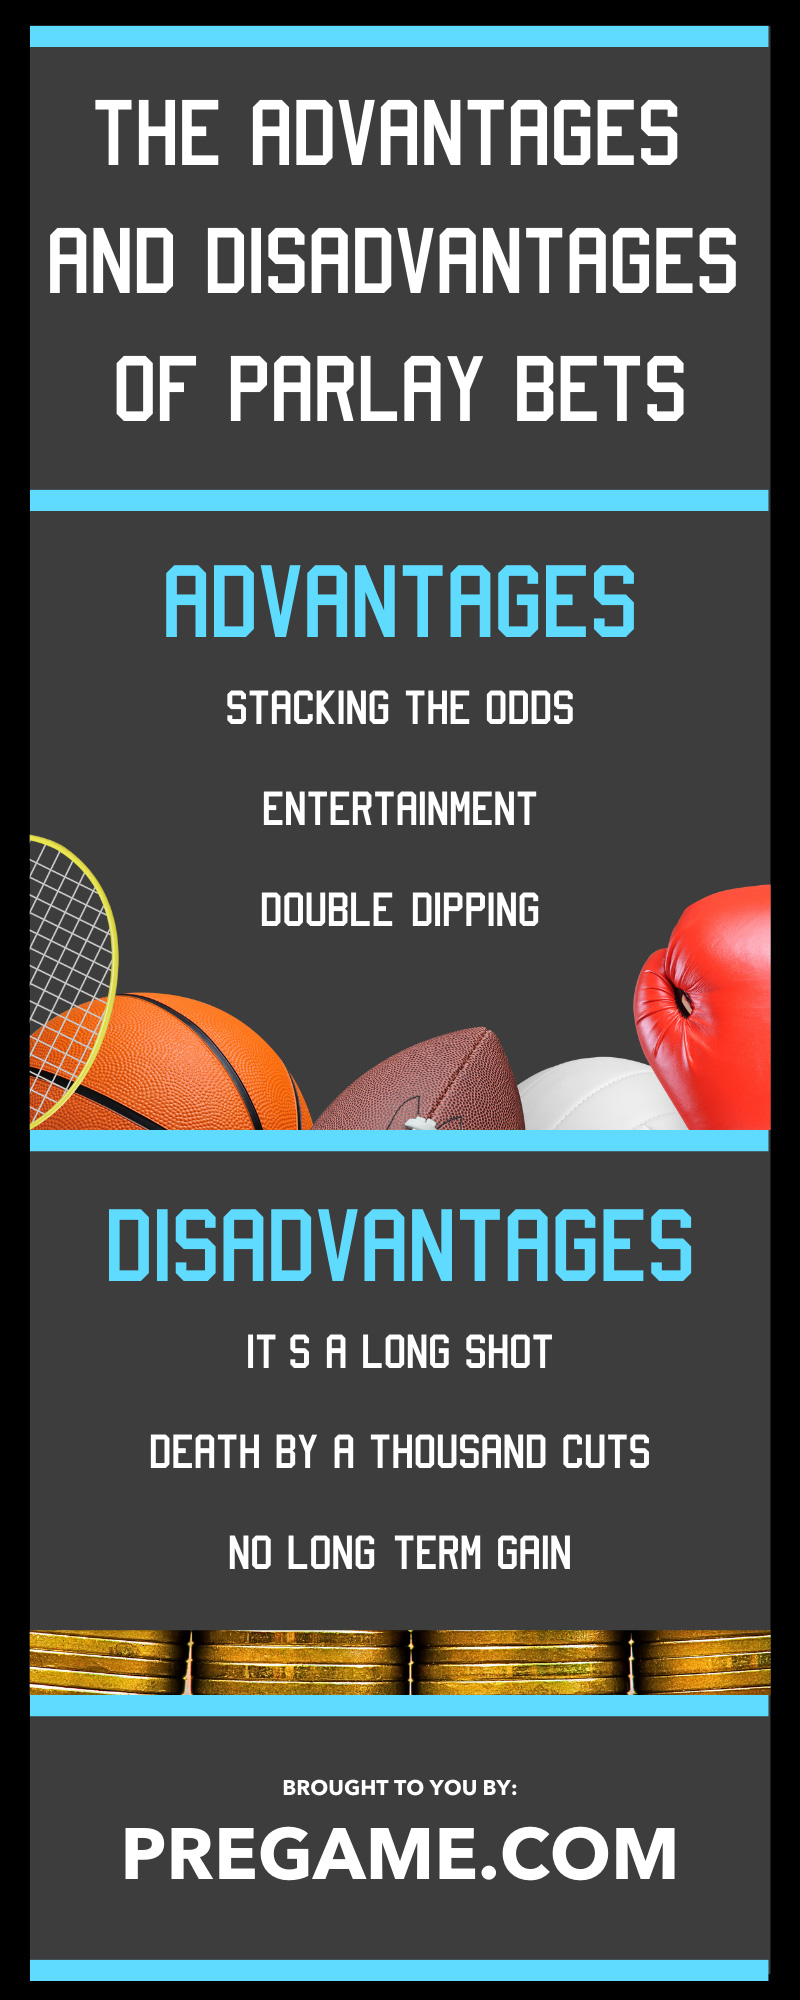 The Advantages and Disadvantages of Parlay Bets